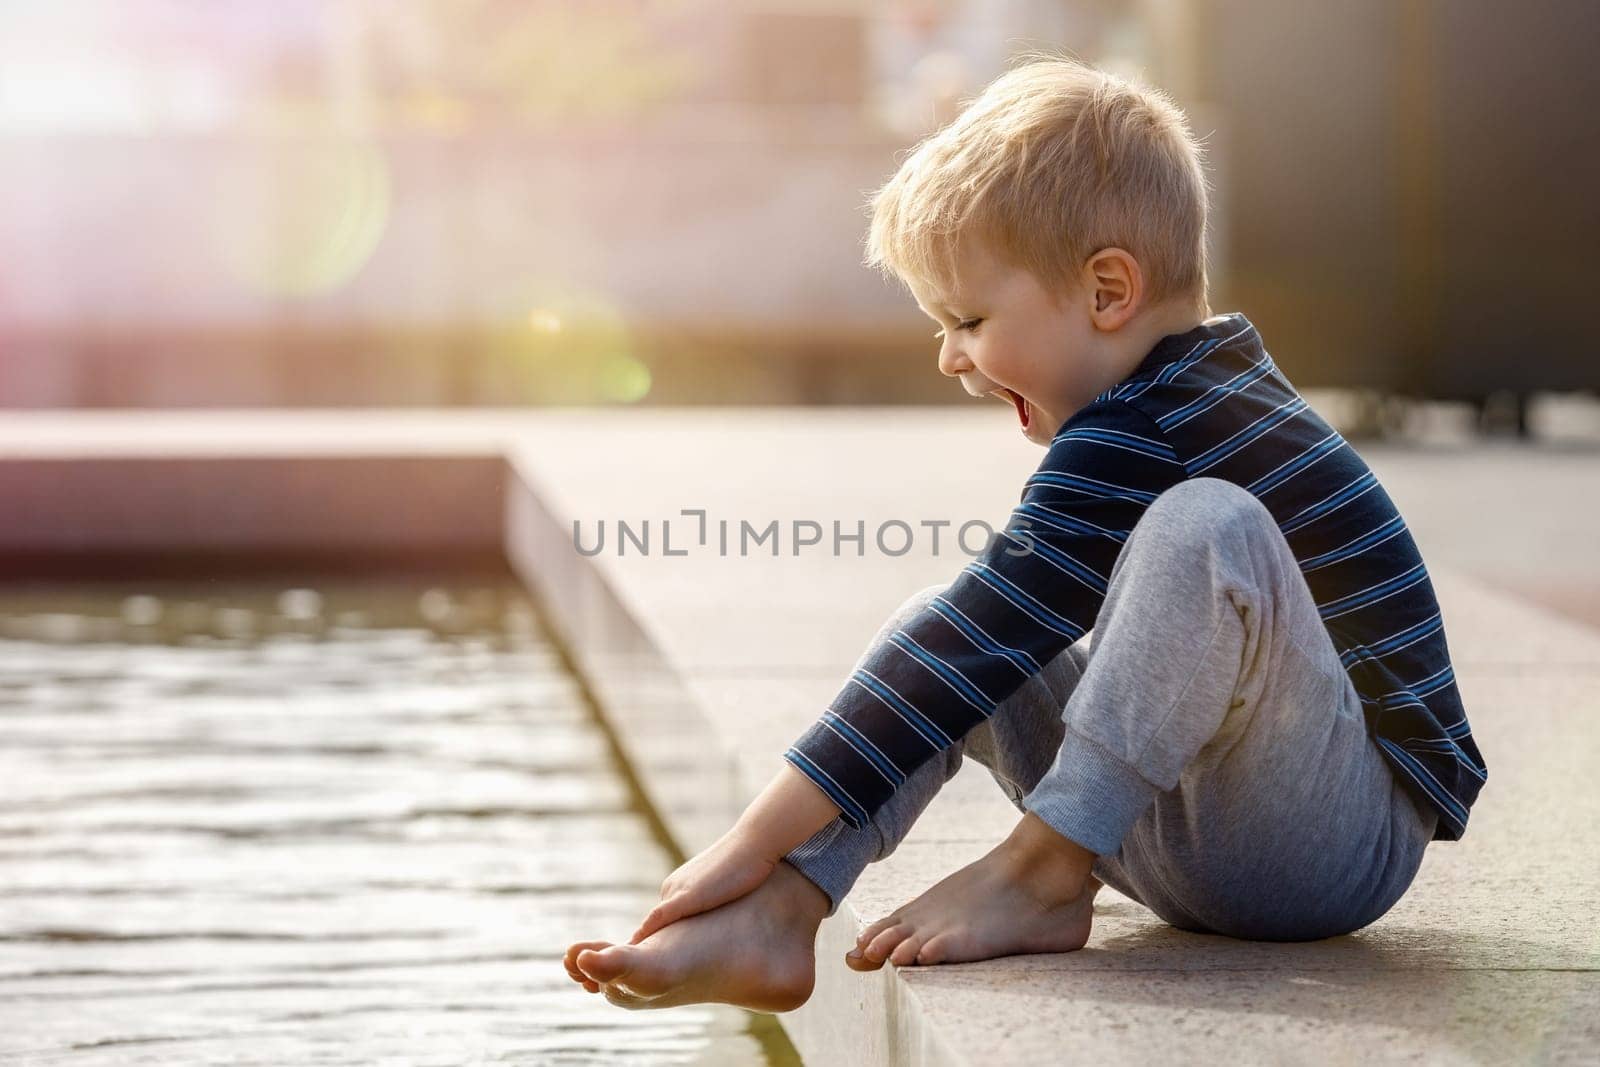 A hilarious boy on a hot summer day in the city is happy to try the cool water of the fountain on his barefoot. The child is surprised by the low water temperature.